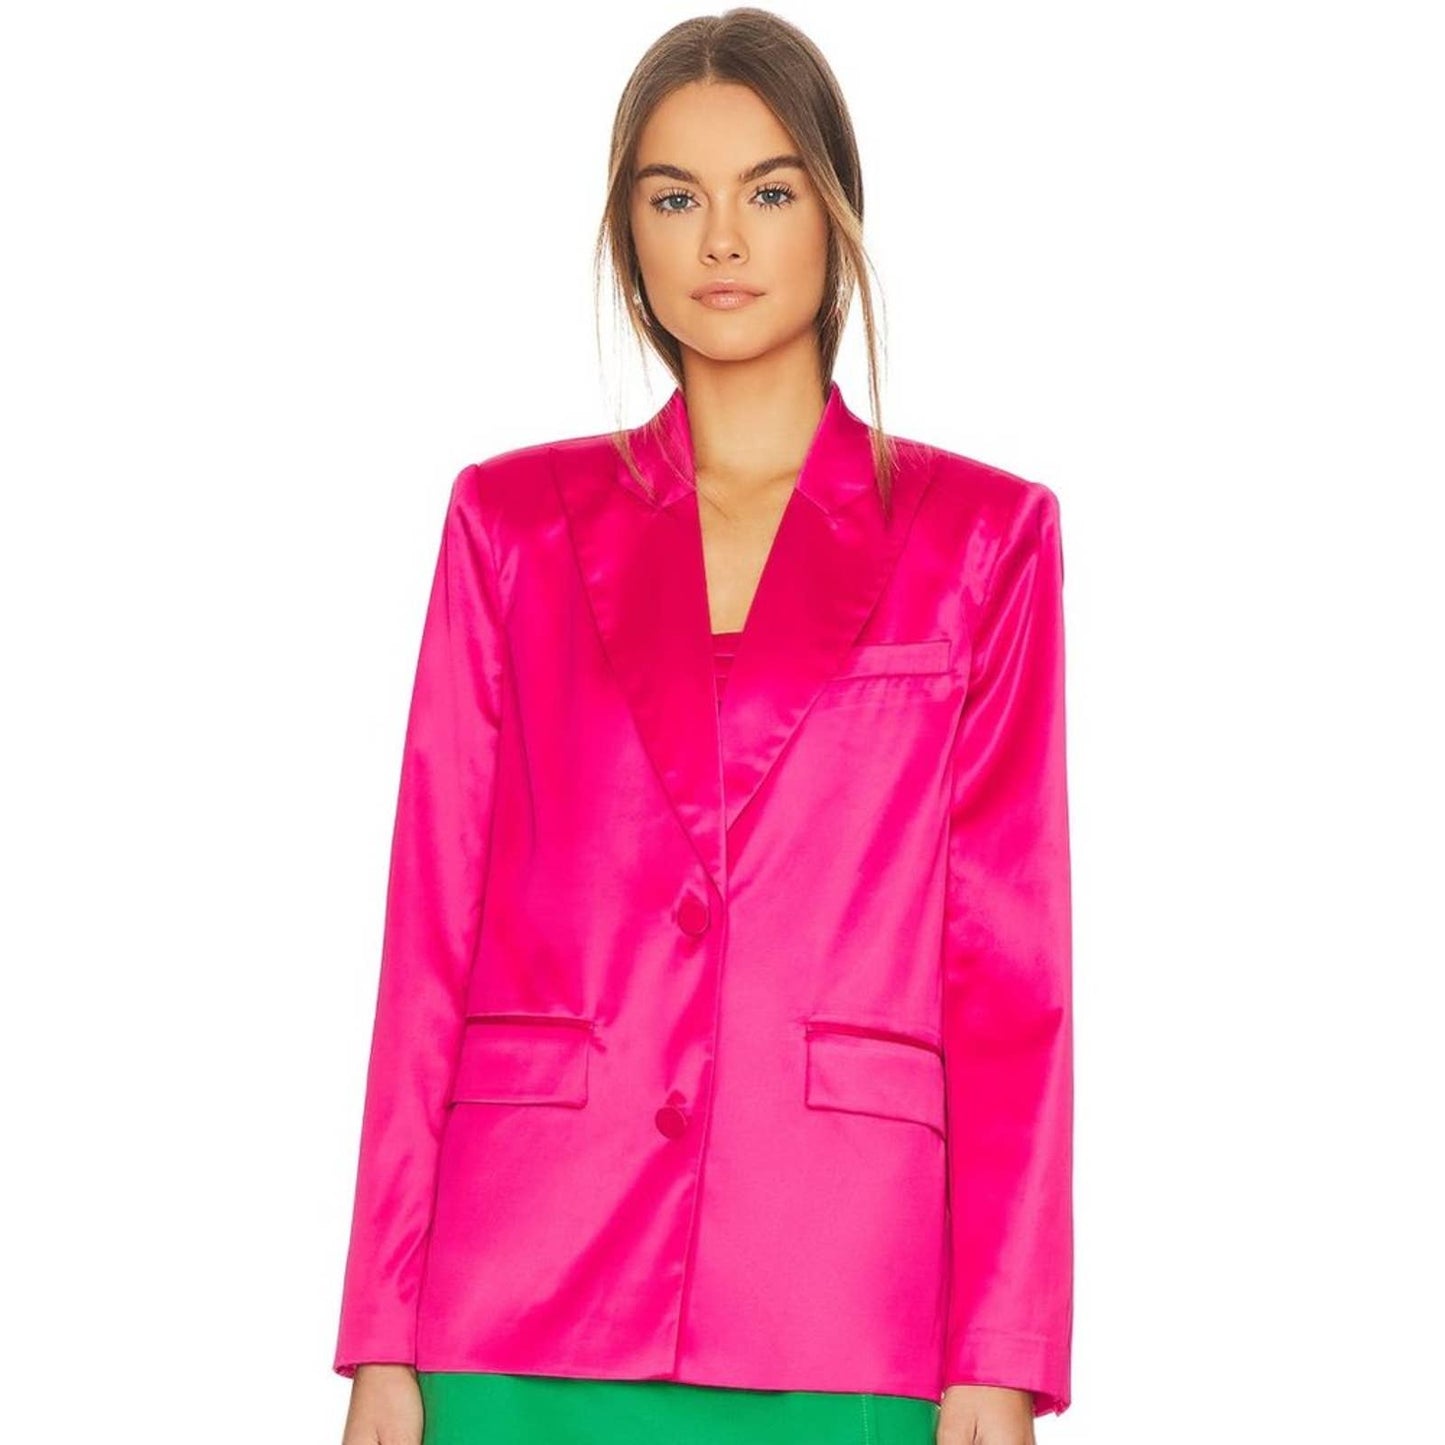 Lovers and Friends Andie Blazer in Raspberry Pink NWT Size Medium